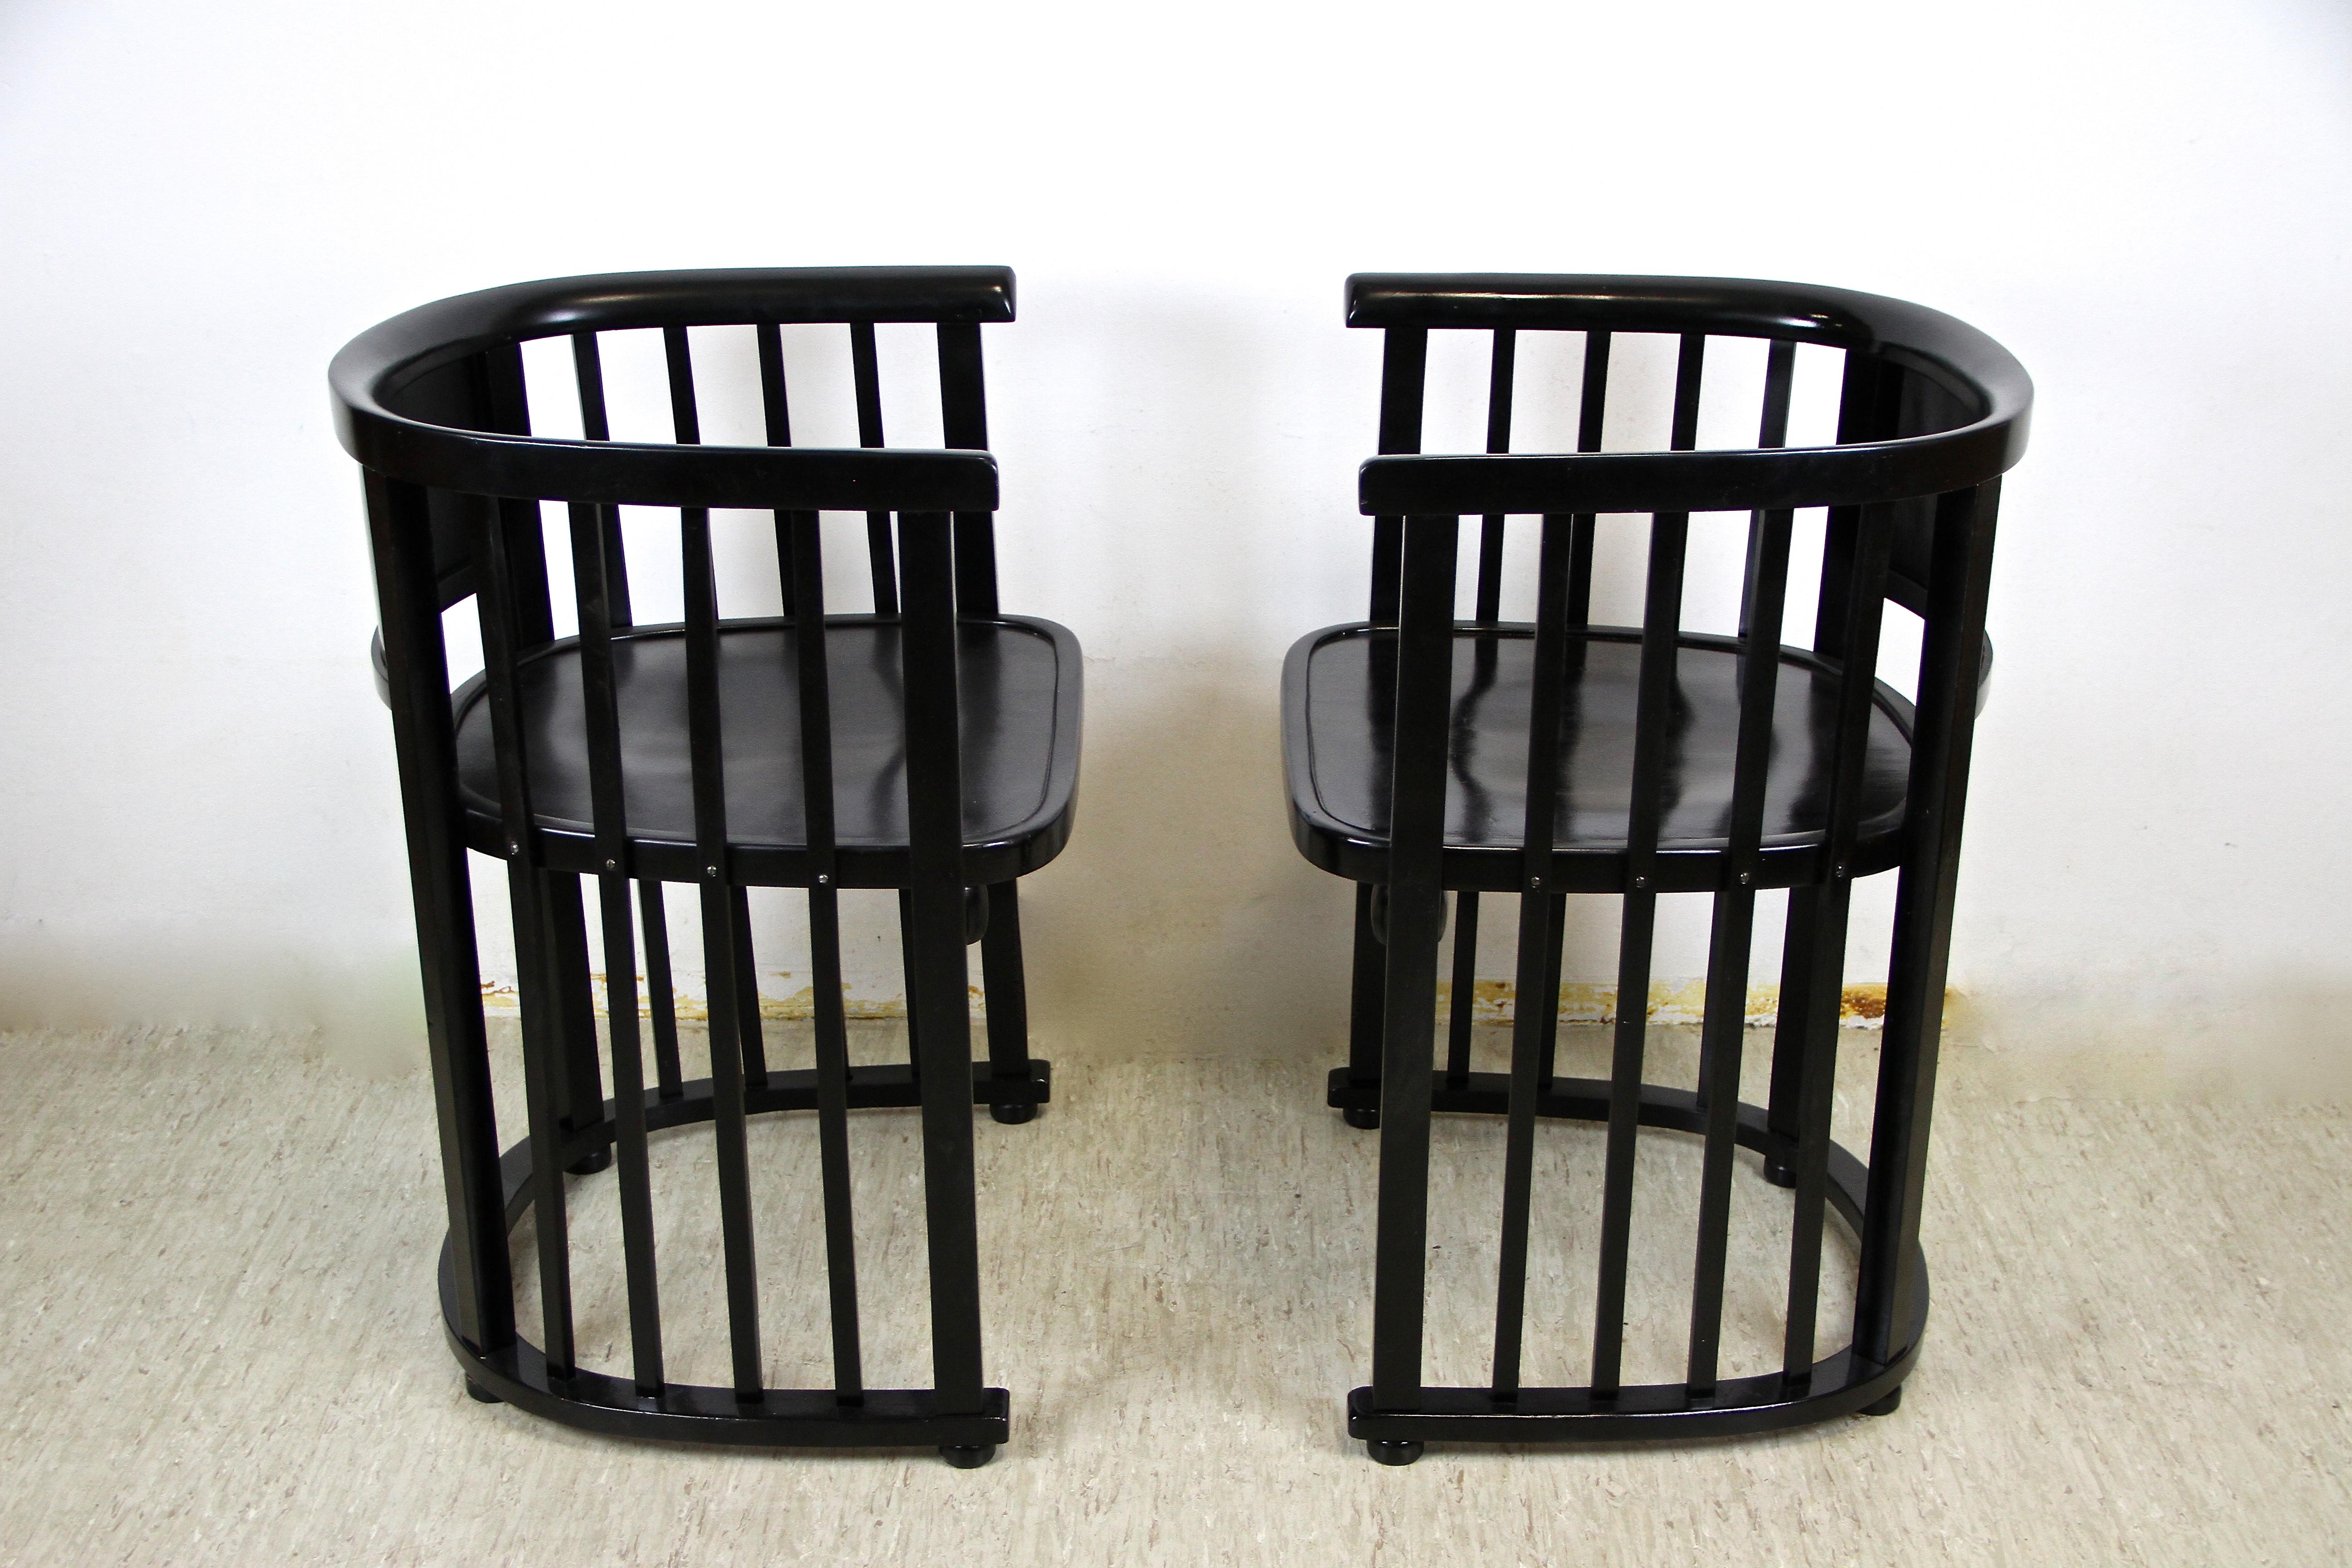 Bentwood Chairs Design Josef Hoffmann Attributed to J&J Kohn, Austria, ca. 1910 In Good Condition For Sale In Lichtenberg, AT